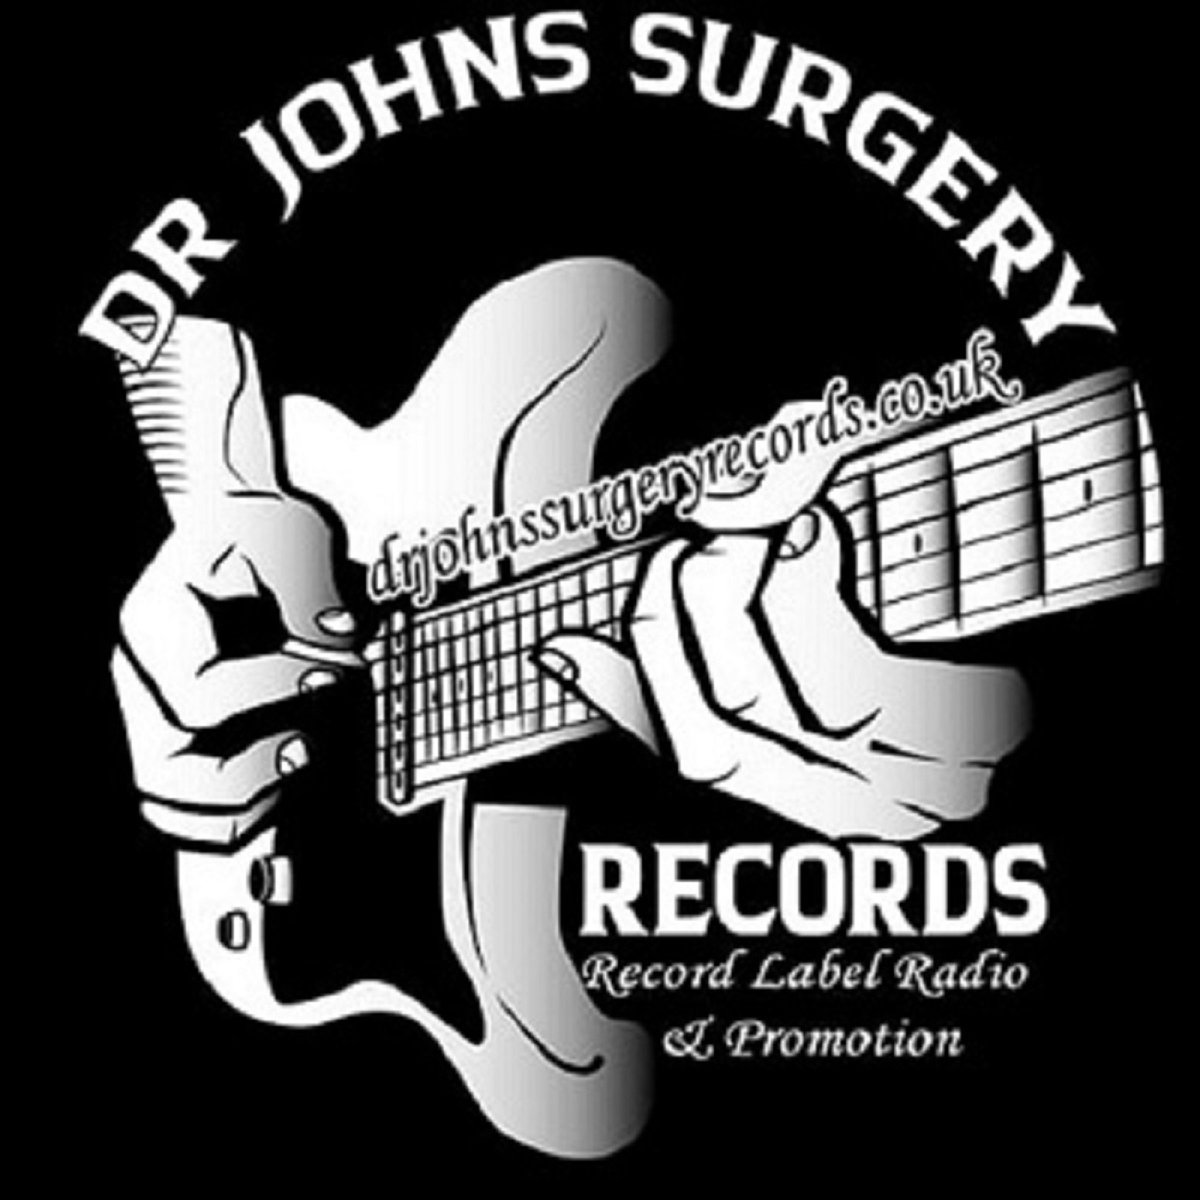 just a small announcement , The Label will be getting Split into 2 segments very soon it will be Dr Johns Surgery Records Country we are now looking for a person who can run the Country side of the label want to become a part of a fast growing Label then pm me